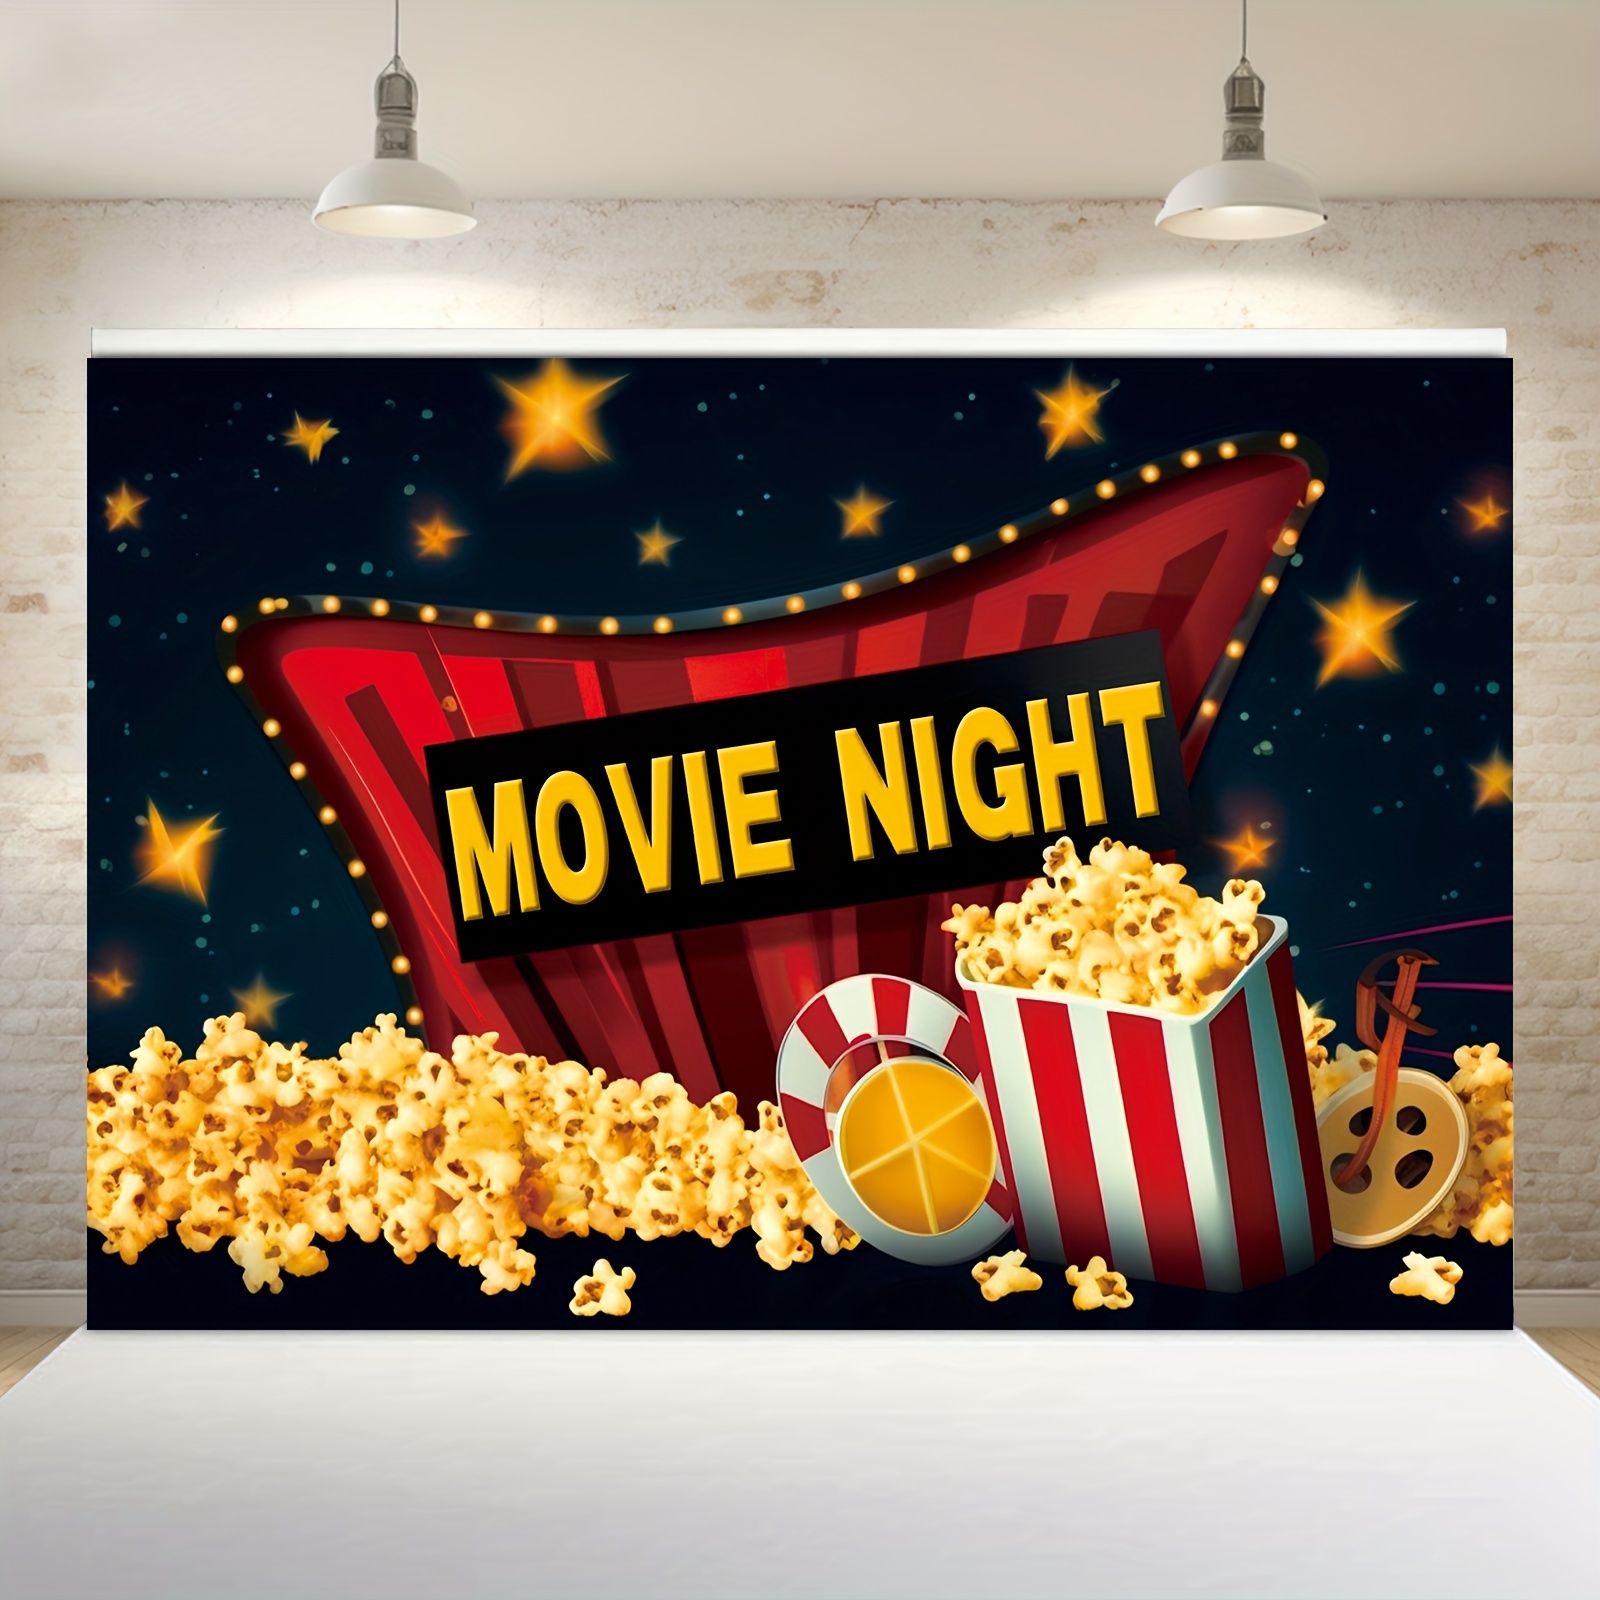 Kangling 5 Pieces Movie Theater Decor Wooden Home Theater Room Decor Cinema Wall Art Movie Reel Theater Action Popcorn Ticket Sign Movie Night Deco